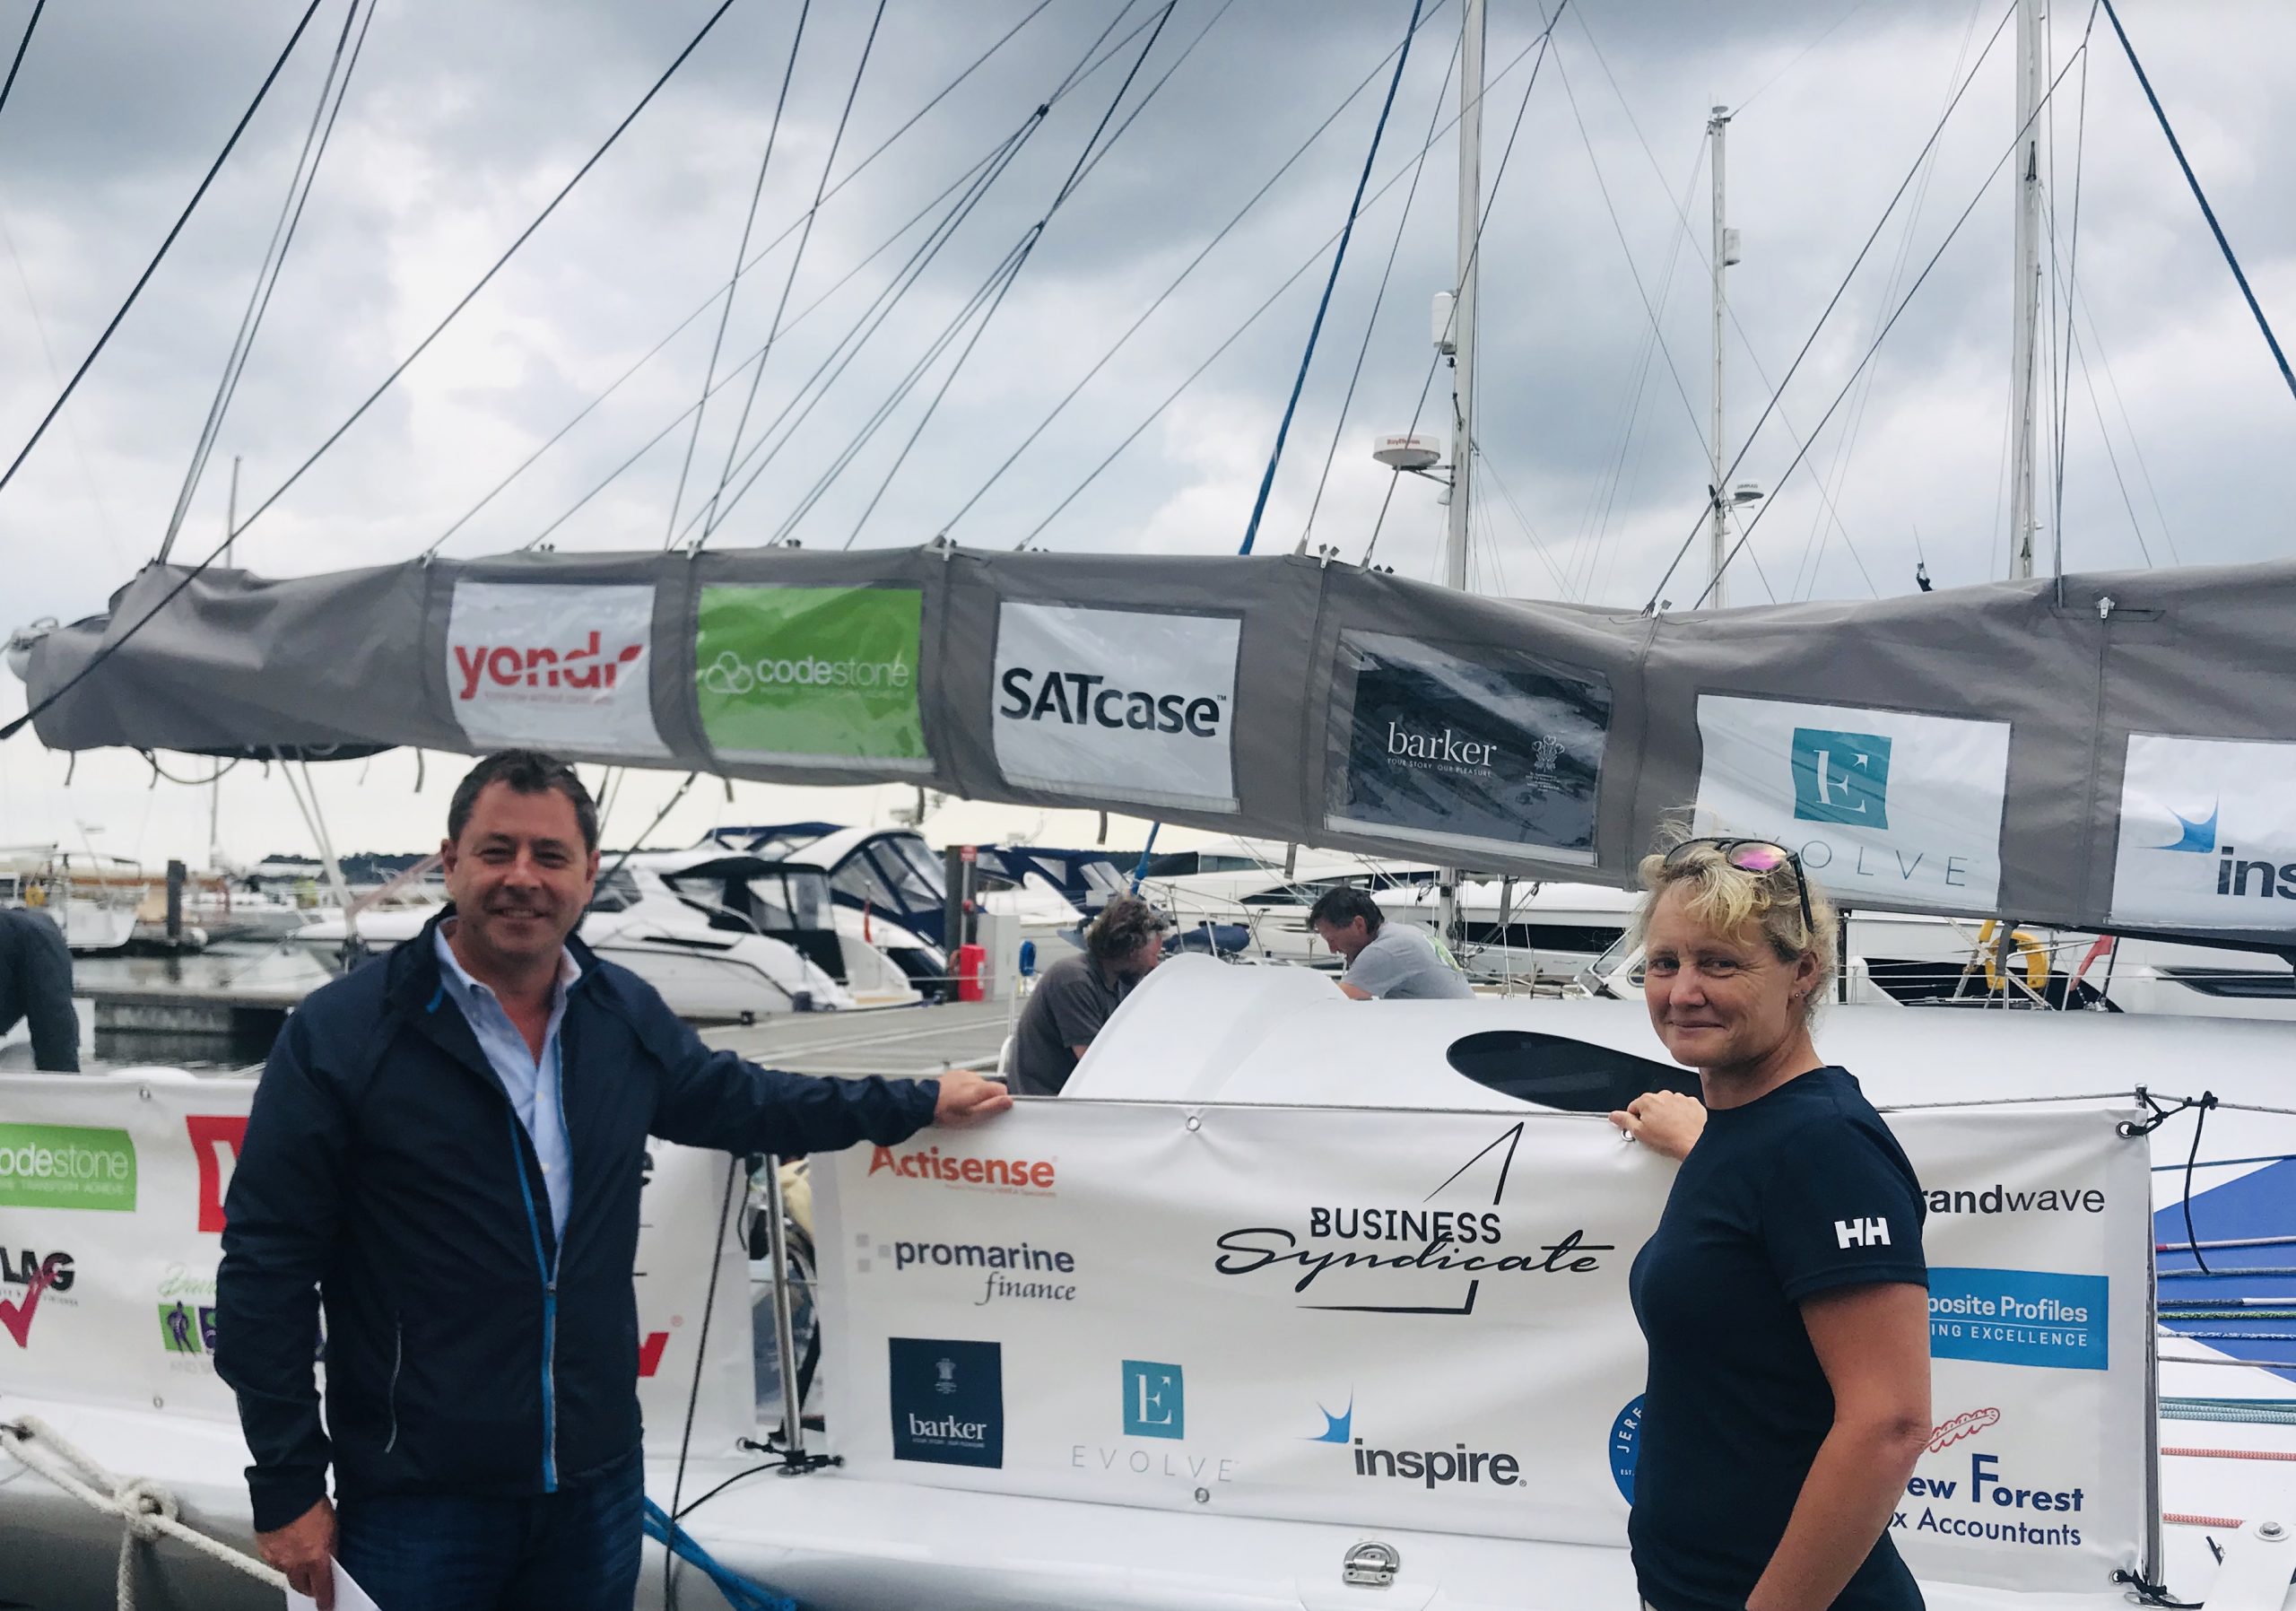 PREPARING FOR THE VENDEE GLOBE: Matthew Barker catches up with yachtswoman Pip Hare to see how her preparations are going